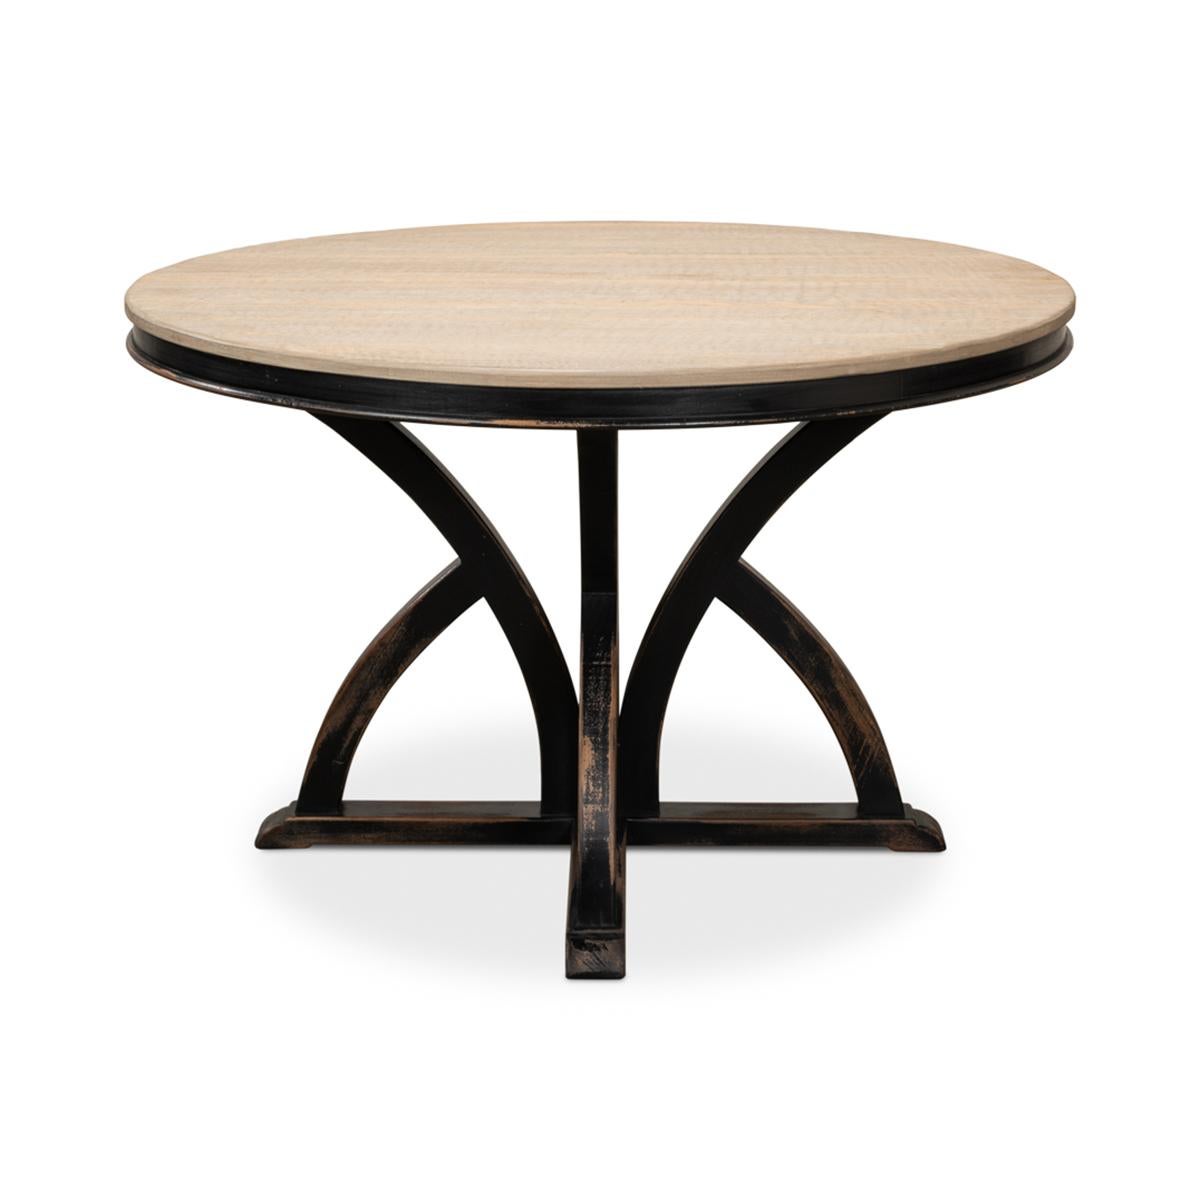 Rustic round bleached pine top dining table on an unusual painted black distressed base.

Dimensions: 48